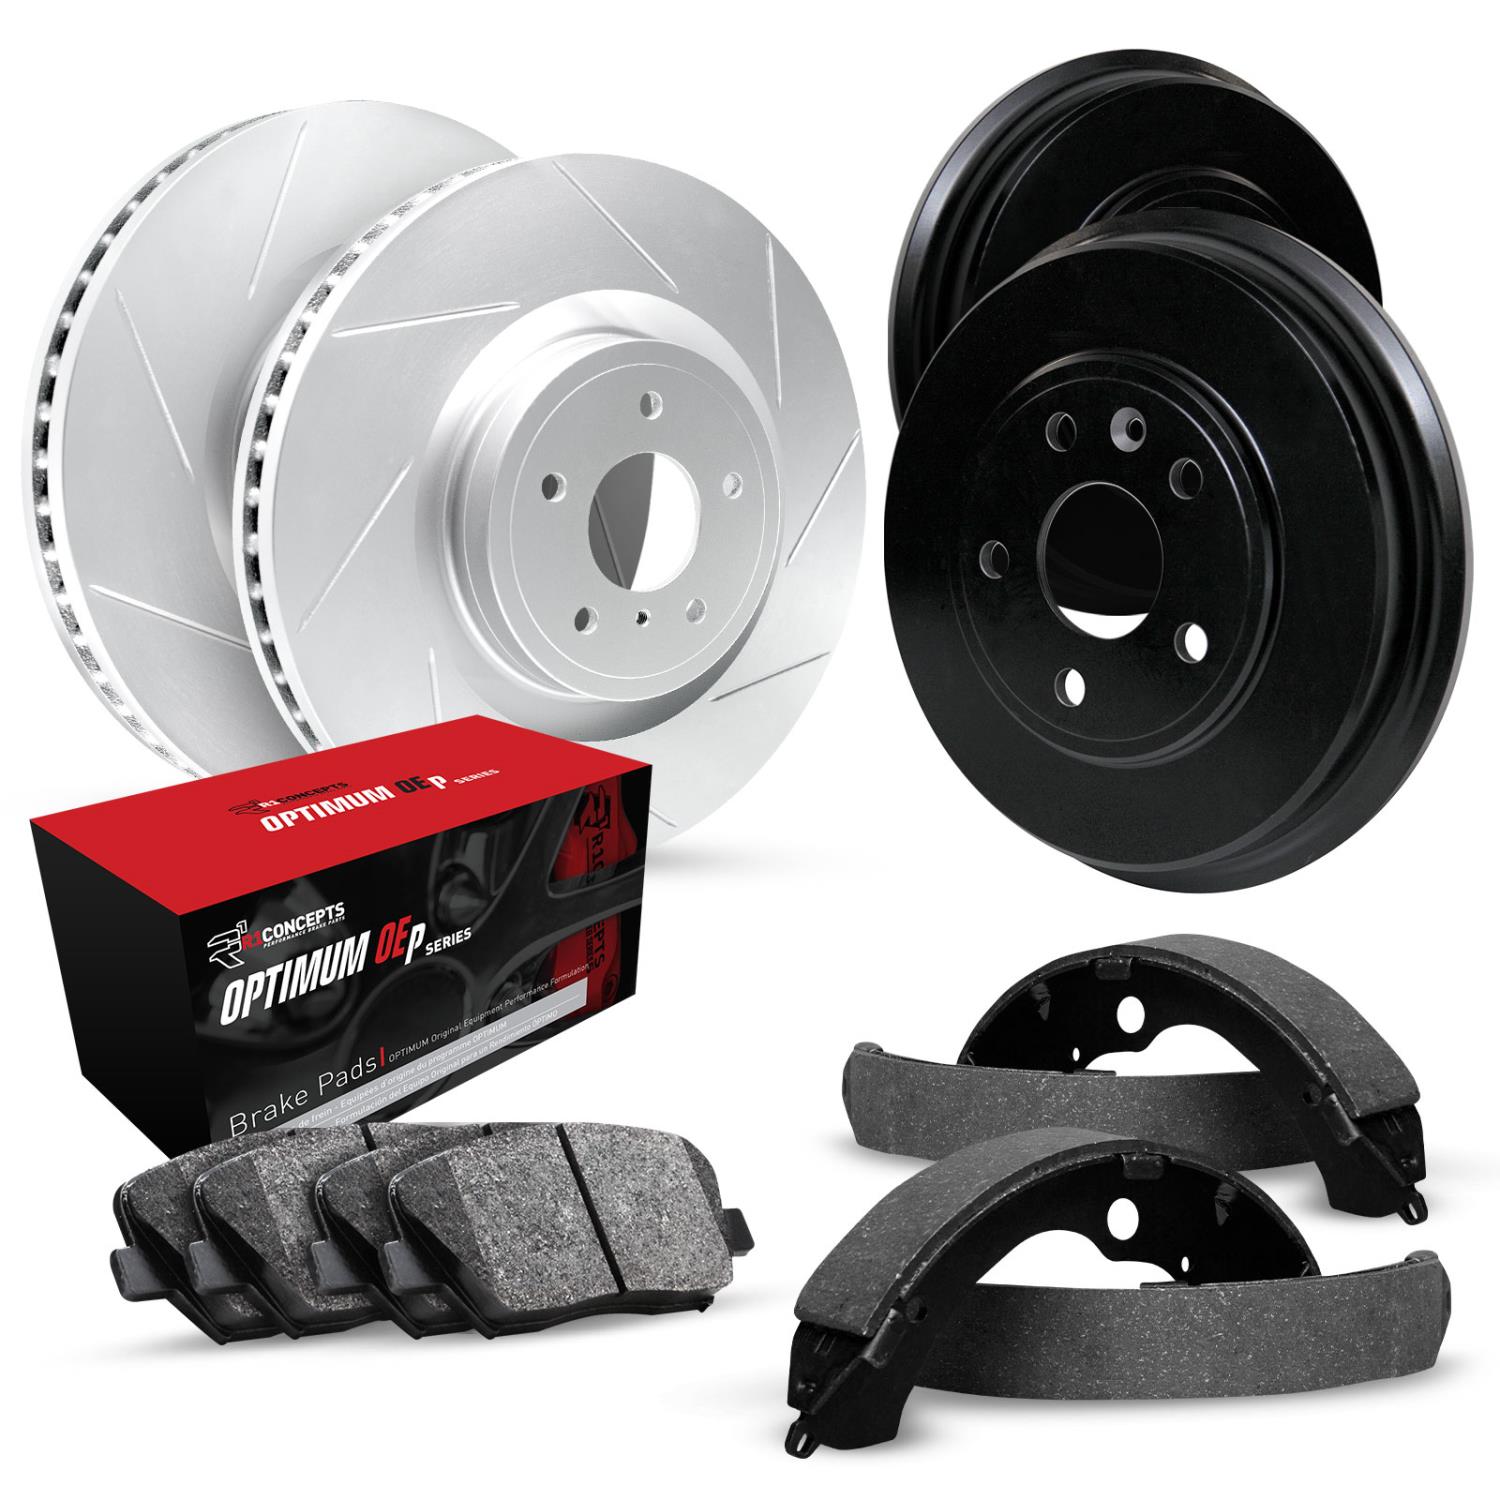 GEO-Carbon Slotted Brake Rotor & Drum Set w/Optimum OE Pads & Shoes, 2001-2007 Ford/Lincoln/Mercury/Mazda